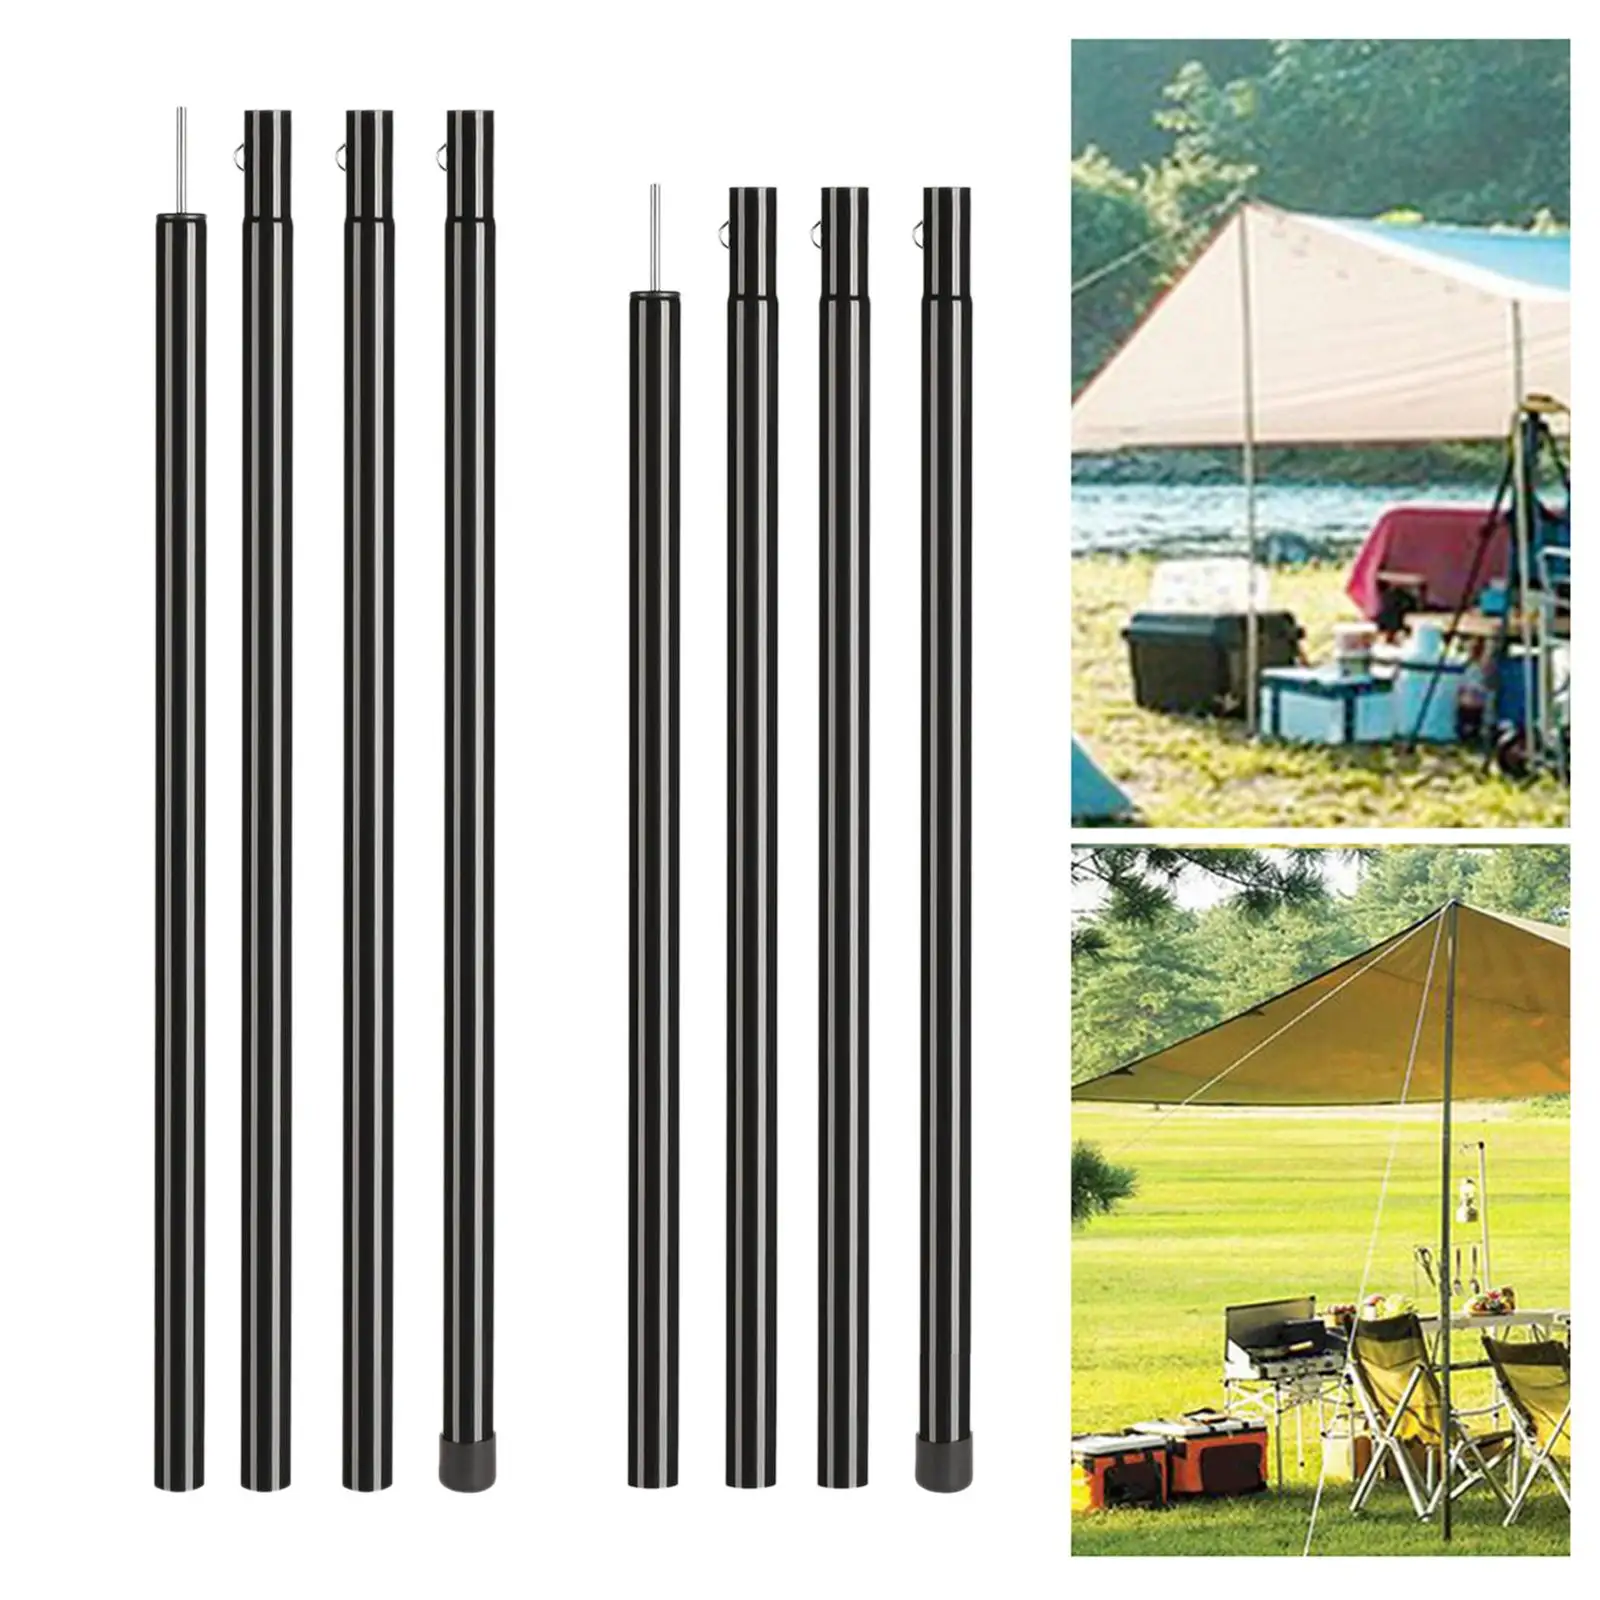 Travel Canopy Pole Waterproof to Install with Storage Bag Durable Canopy Support Rods Awning Frame Tent Rod